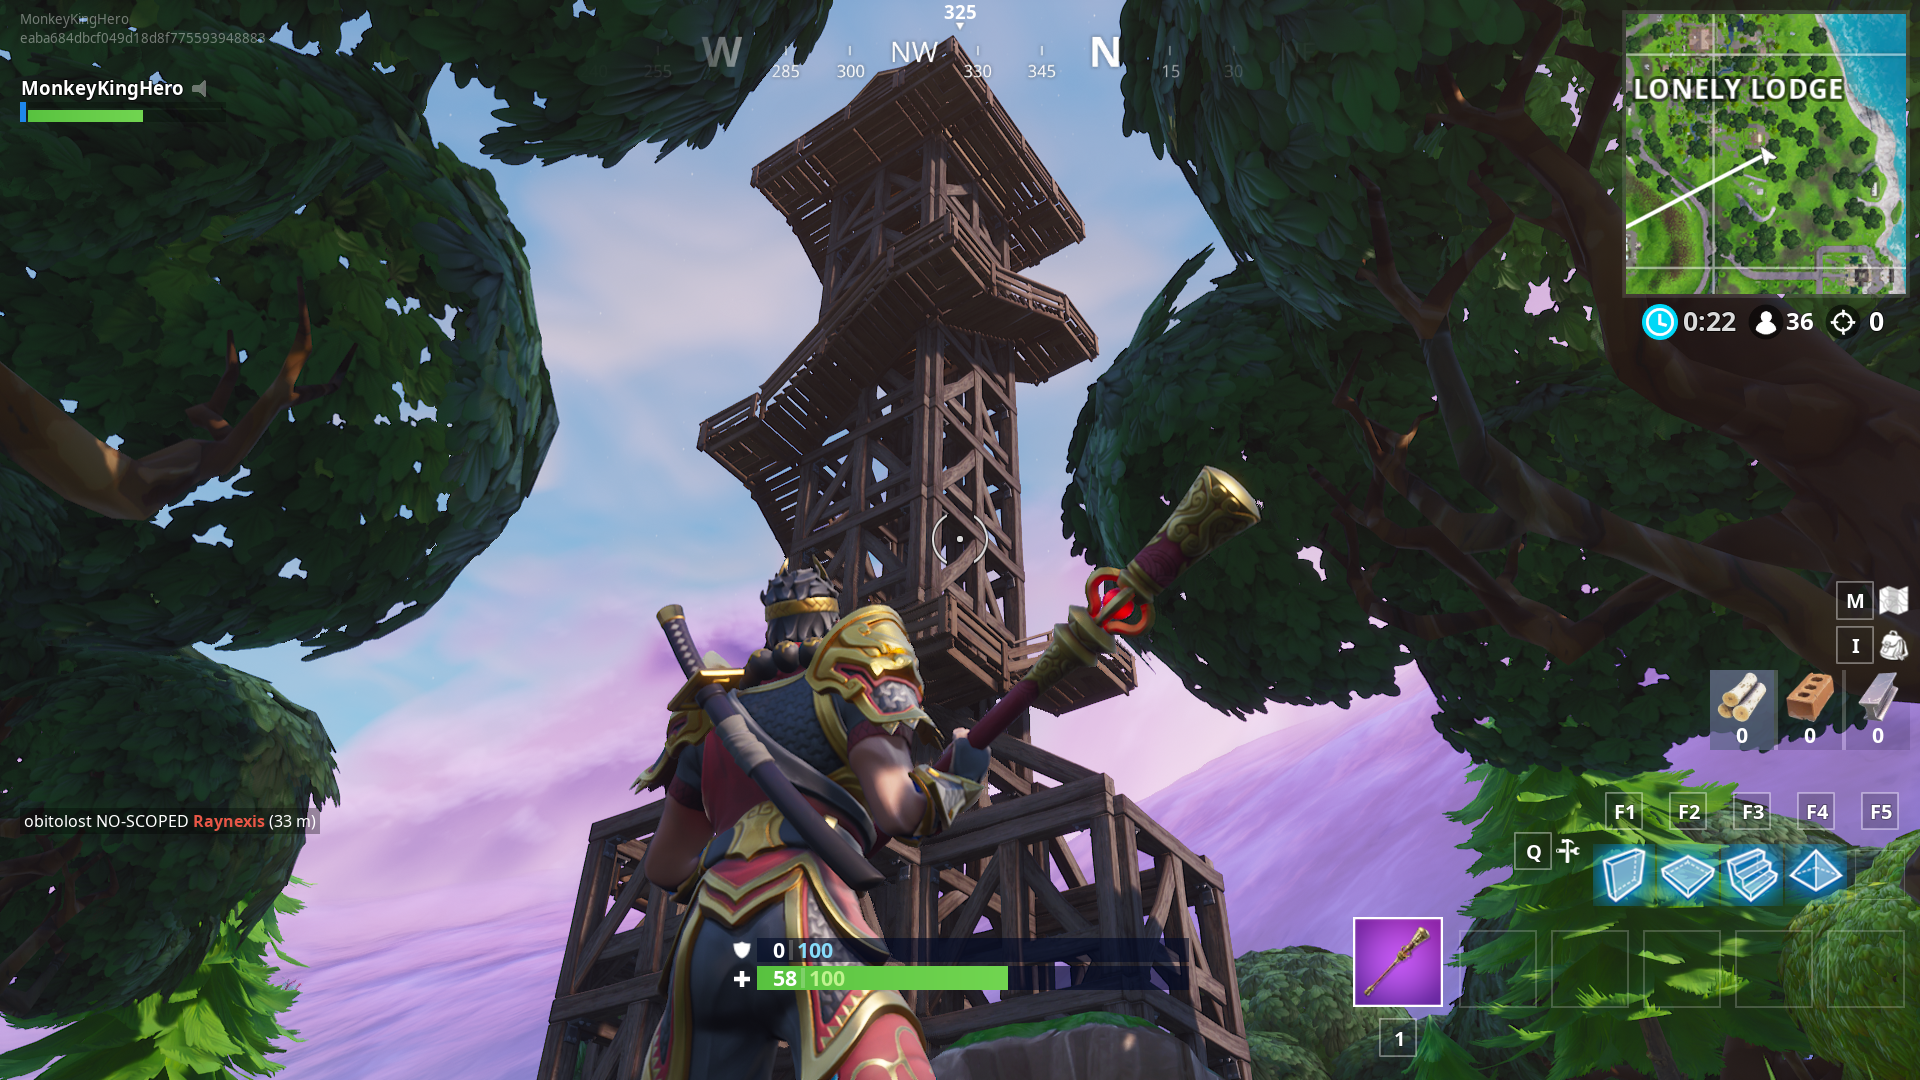 how to complete the dance on top of a water tower challenge in fortnite season 7 week 5 - where is the metal turtle in fortnite season 8